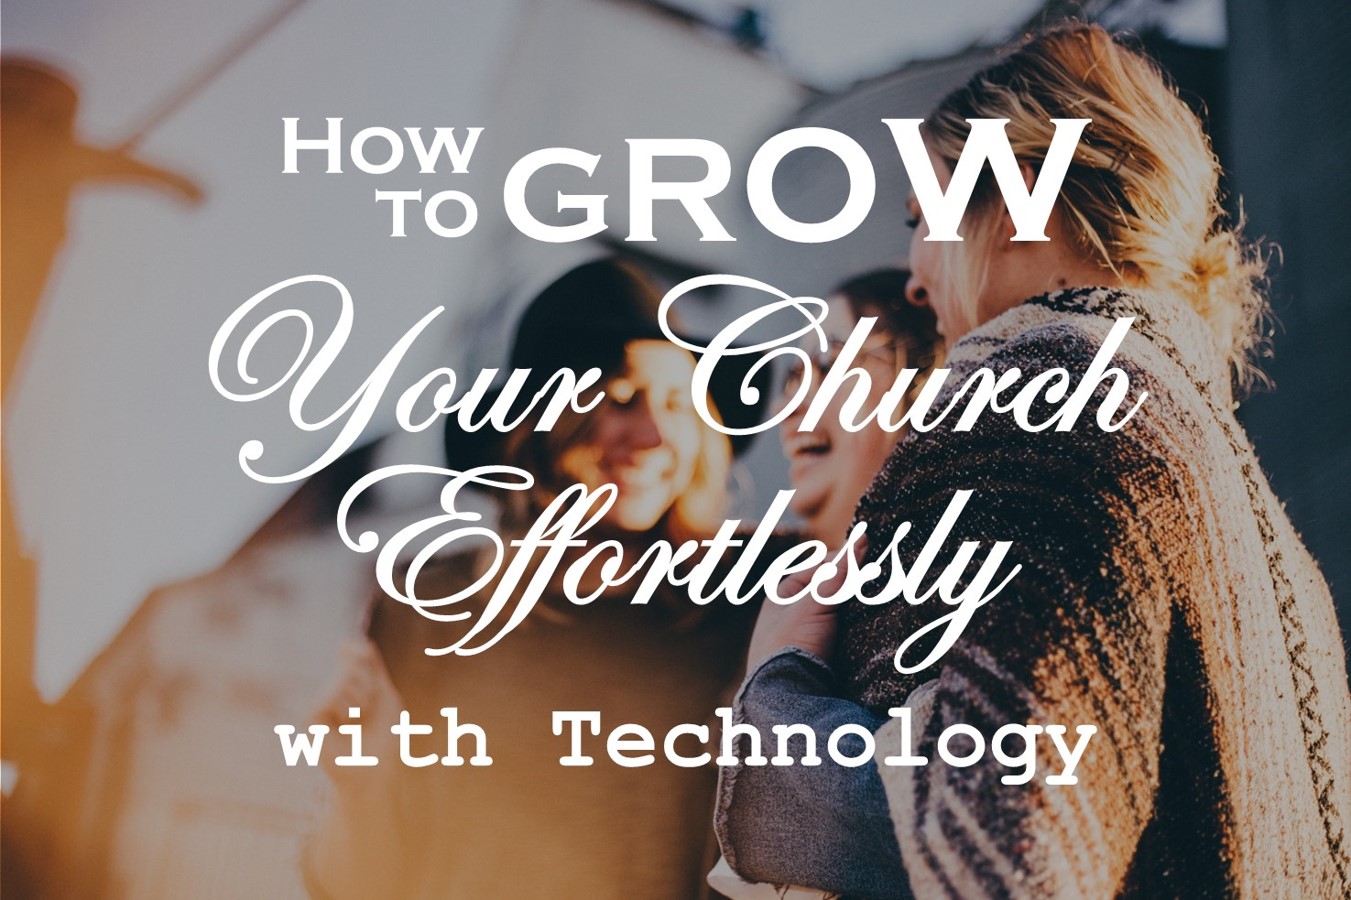 How to Grow Your Church Effortlessly with Technology